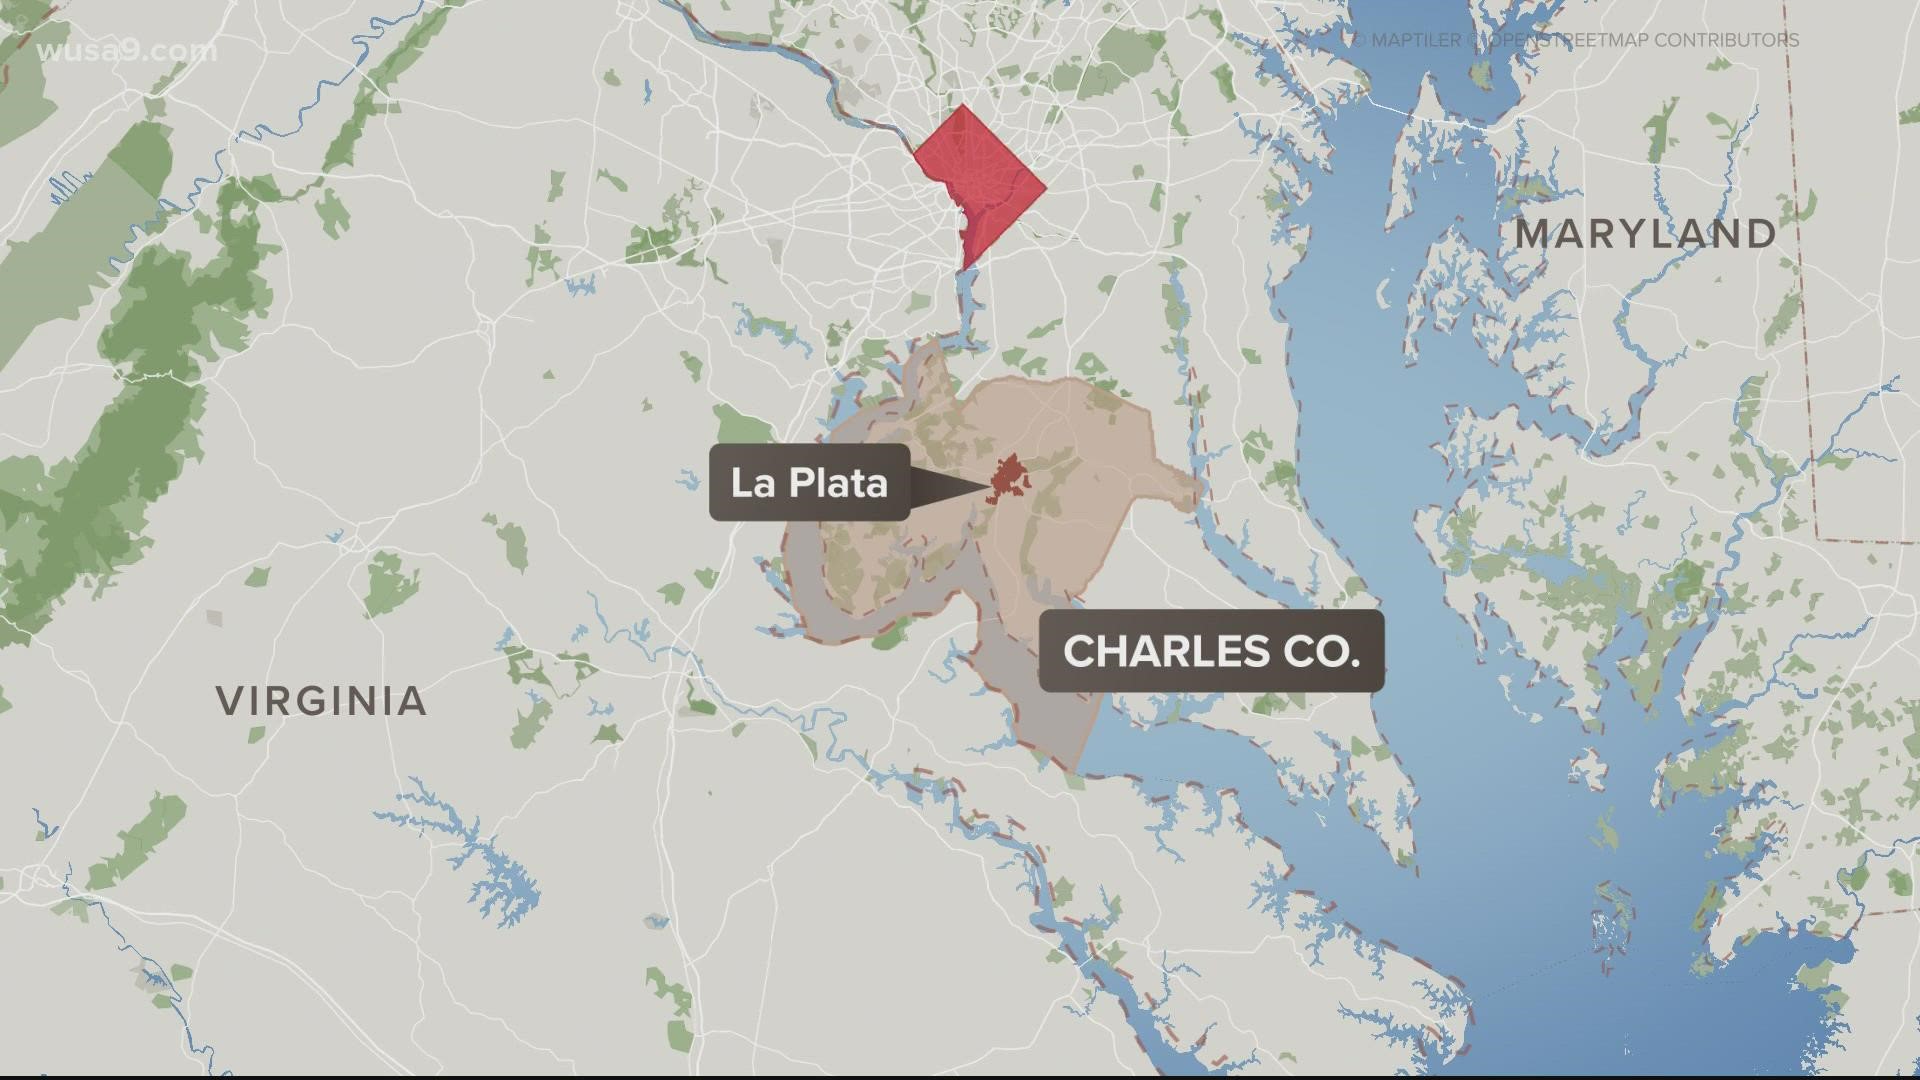 The threats were made on social media, according to the Charles County Sheriff's Office.